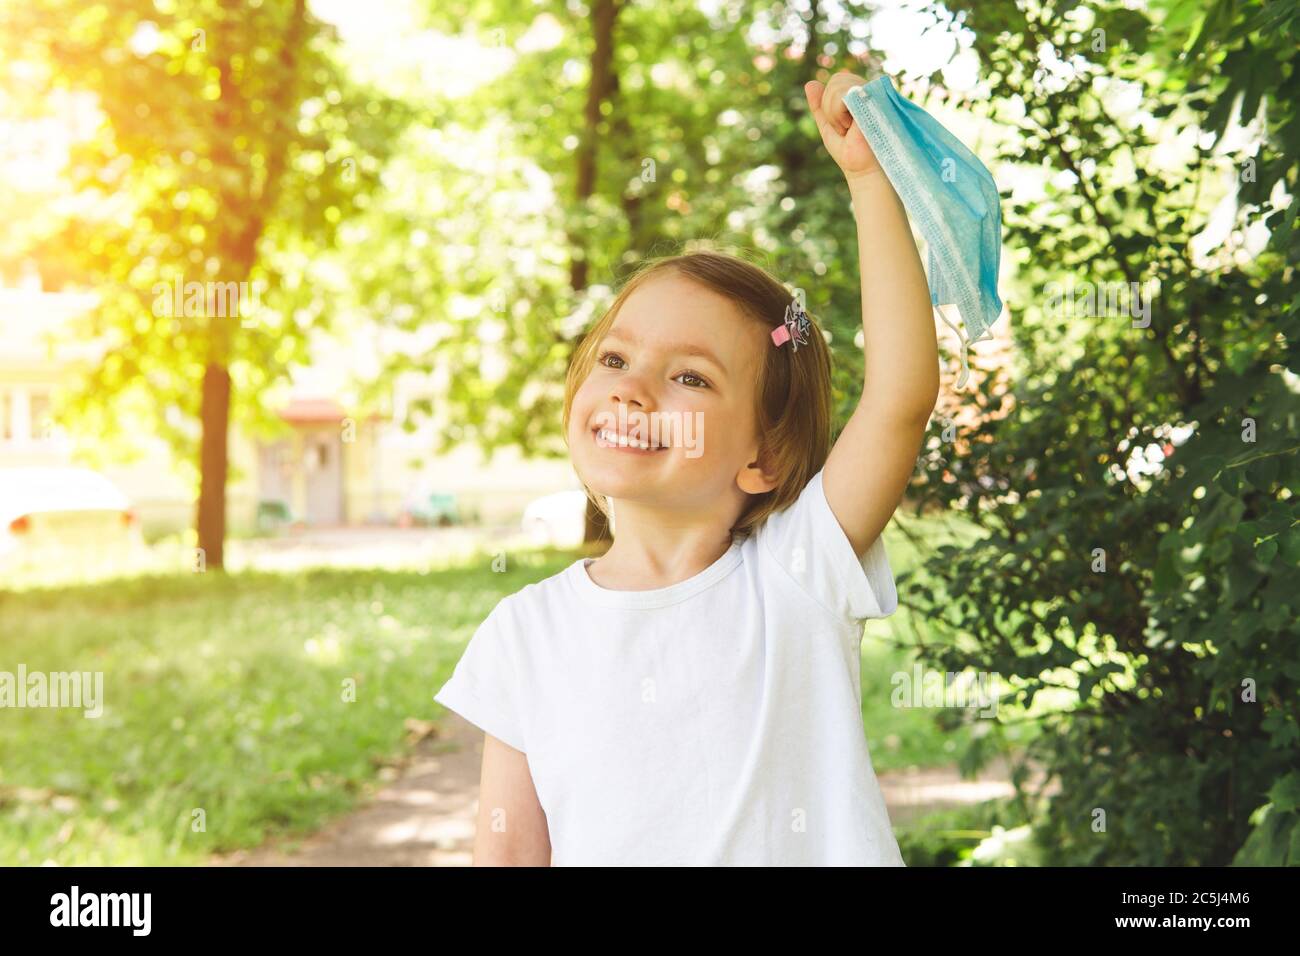 Little cute girl take off medical face mask with happy smile in the outdoor, close up. Concept of happy end and victory over coronavirus. Stock Photo